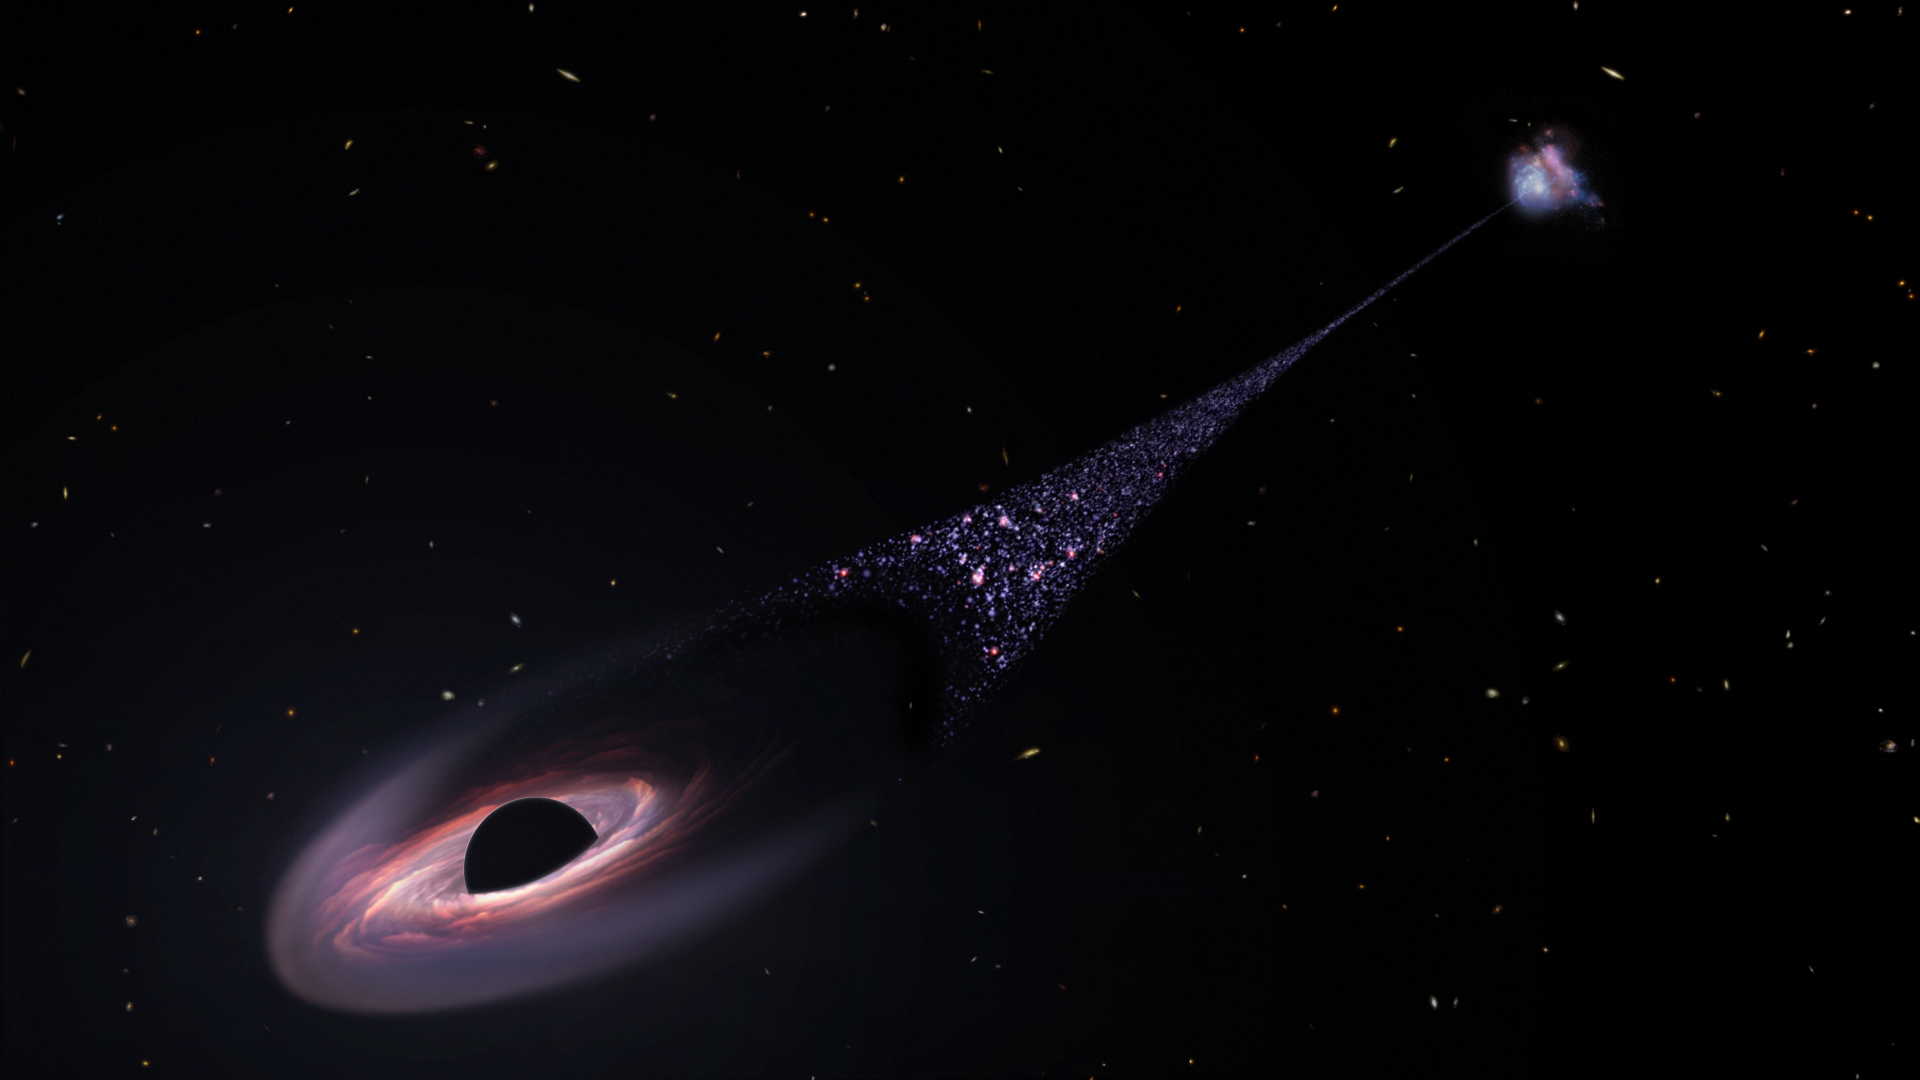 An illustration of a black hole zooming away from its galaxy, with a trail of stars following behind it.